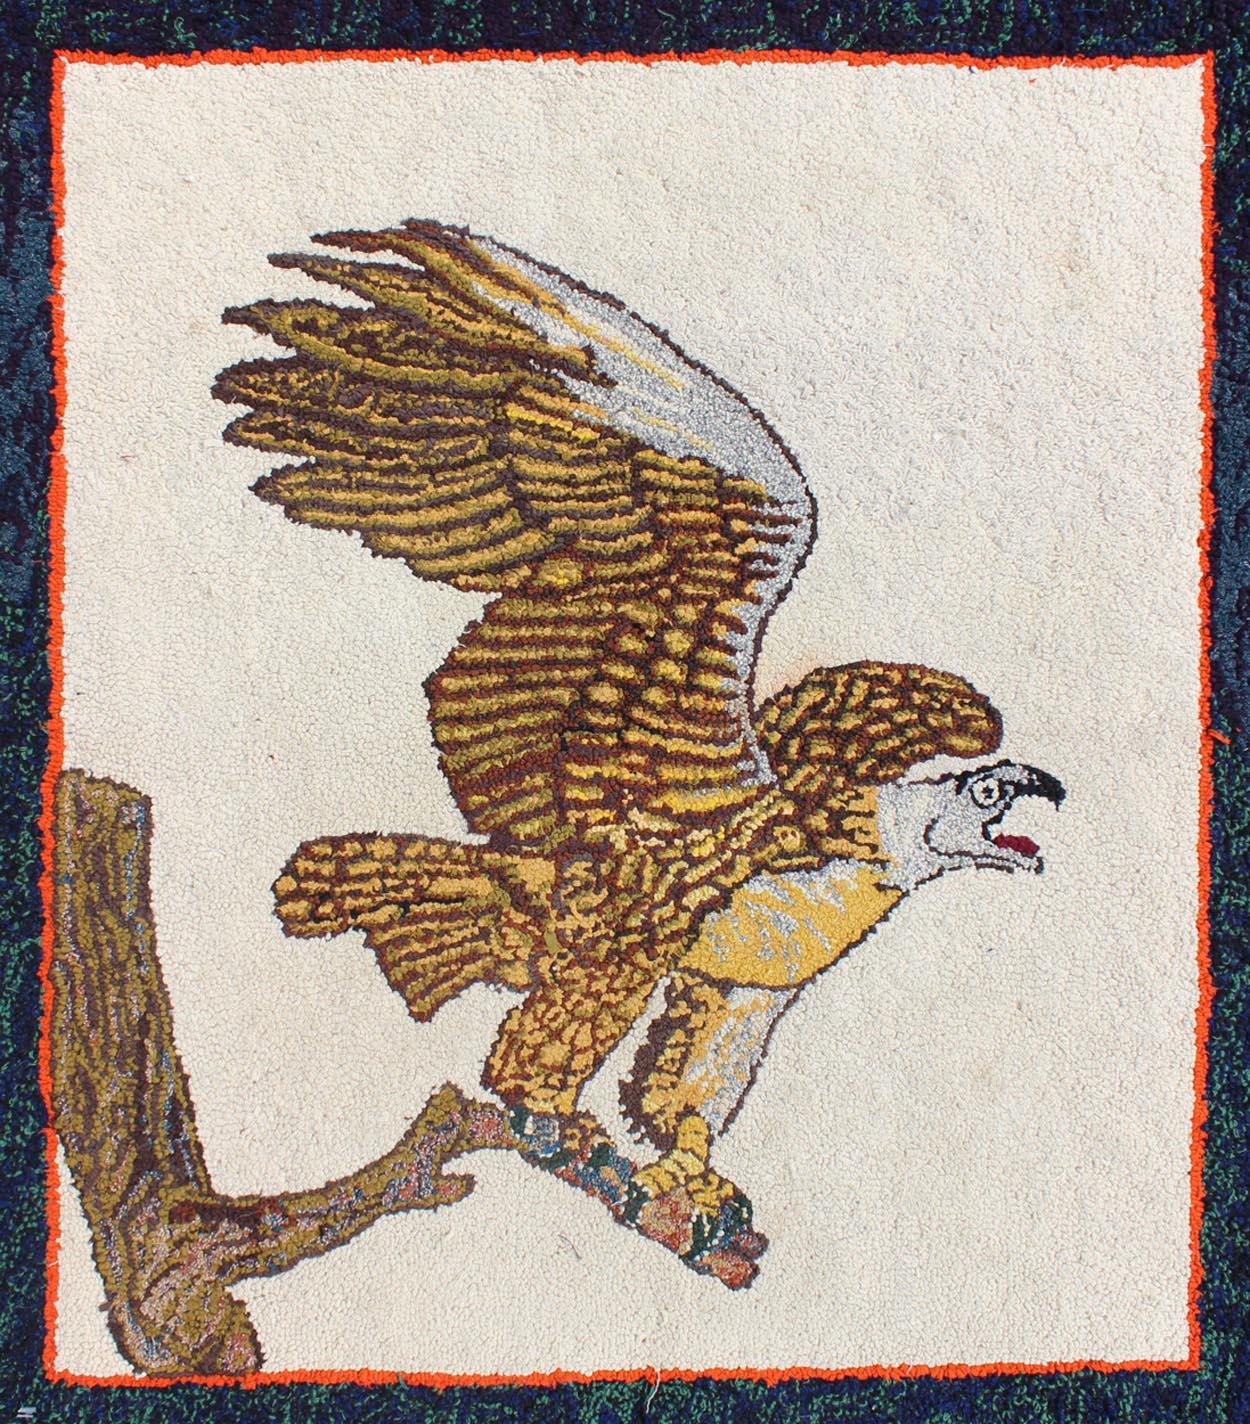 Hand-Woven Pictorial Antique American Hooked Rug Of A American Bald Eagle Hooked Rug For Sale